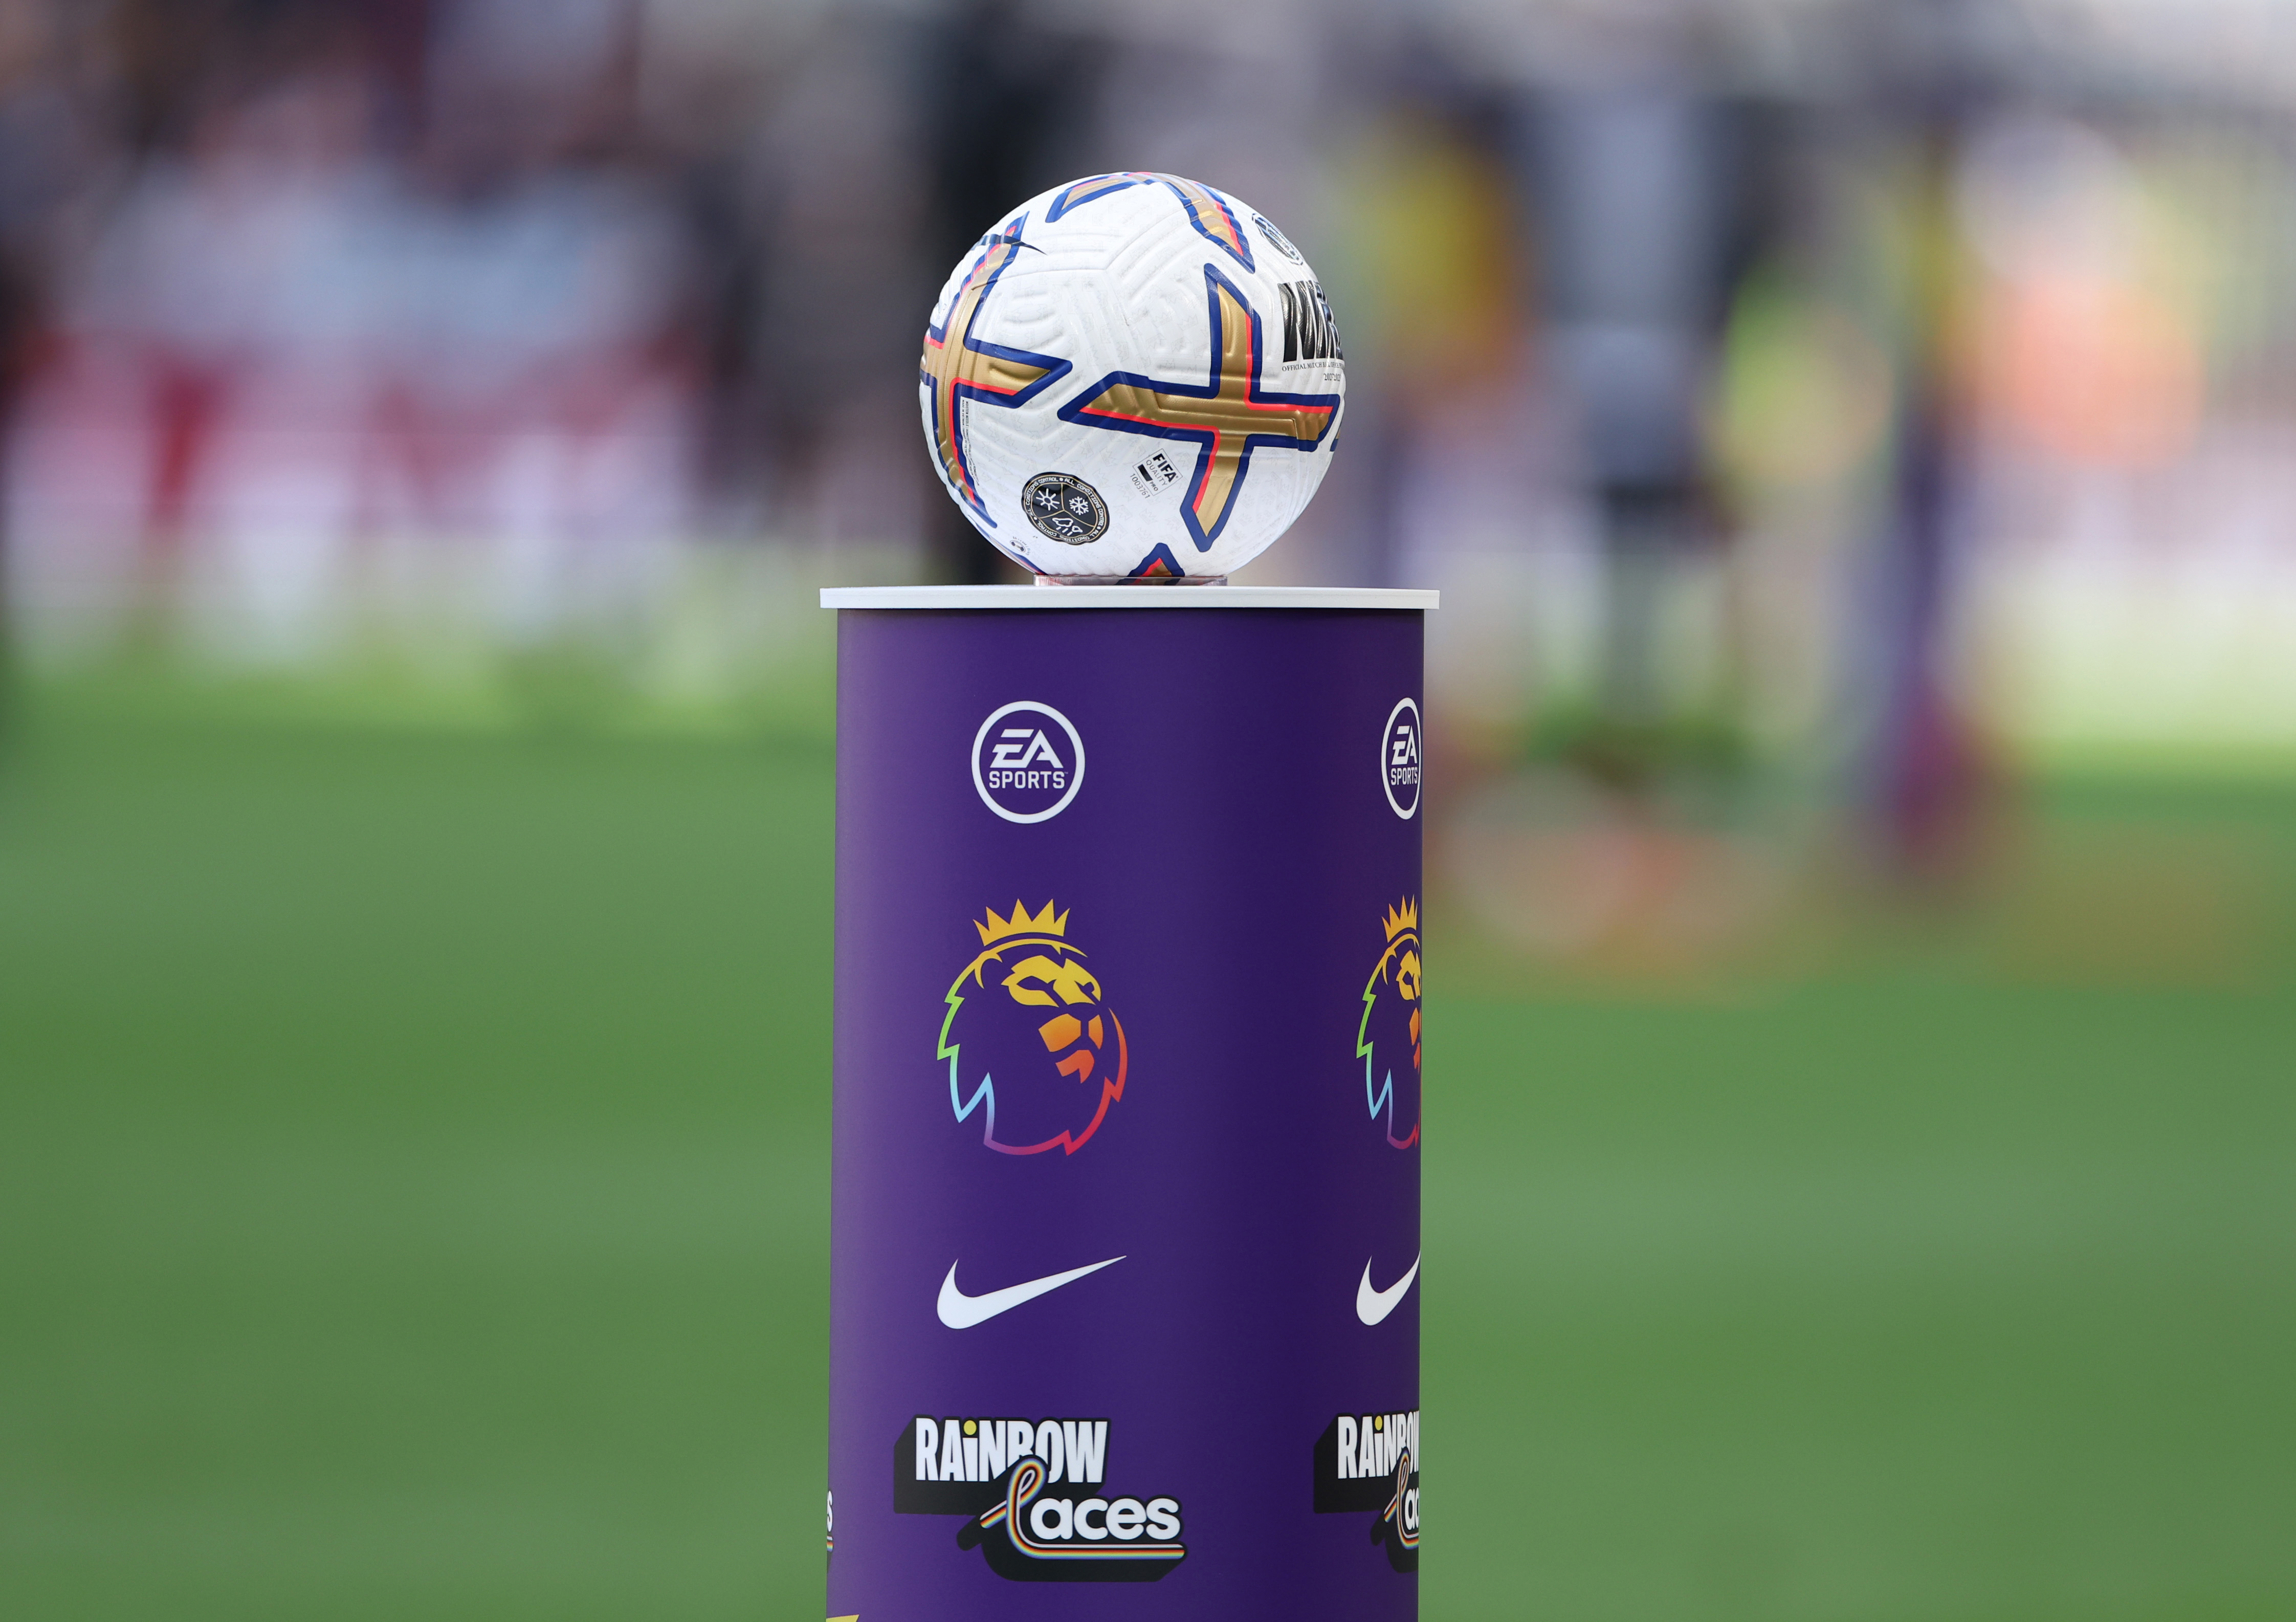 The match ball sits on the Rainbow Laces plinth ahead of the Premier League match between Aston Villa and Brentford FC at Villa Park on October 23, 2022 in Birmingham, England.